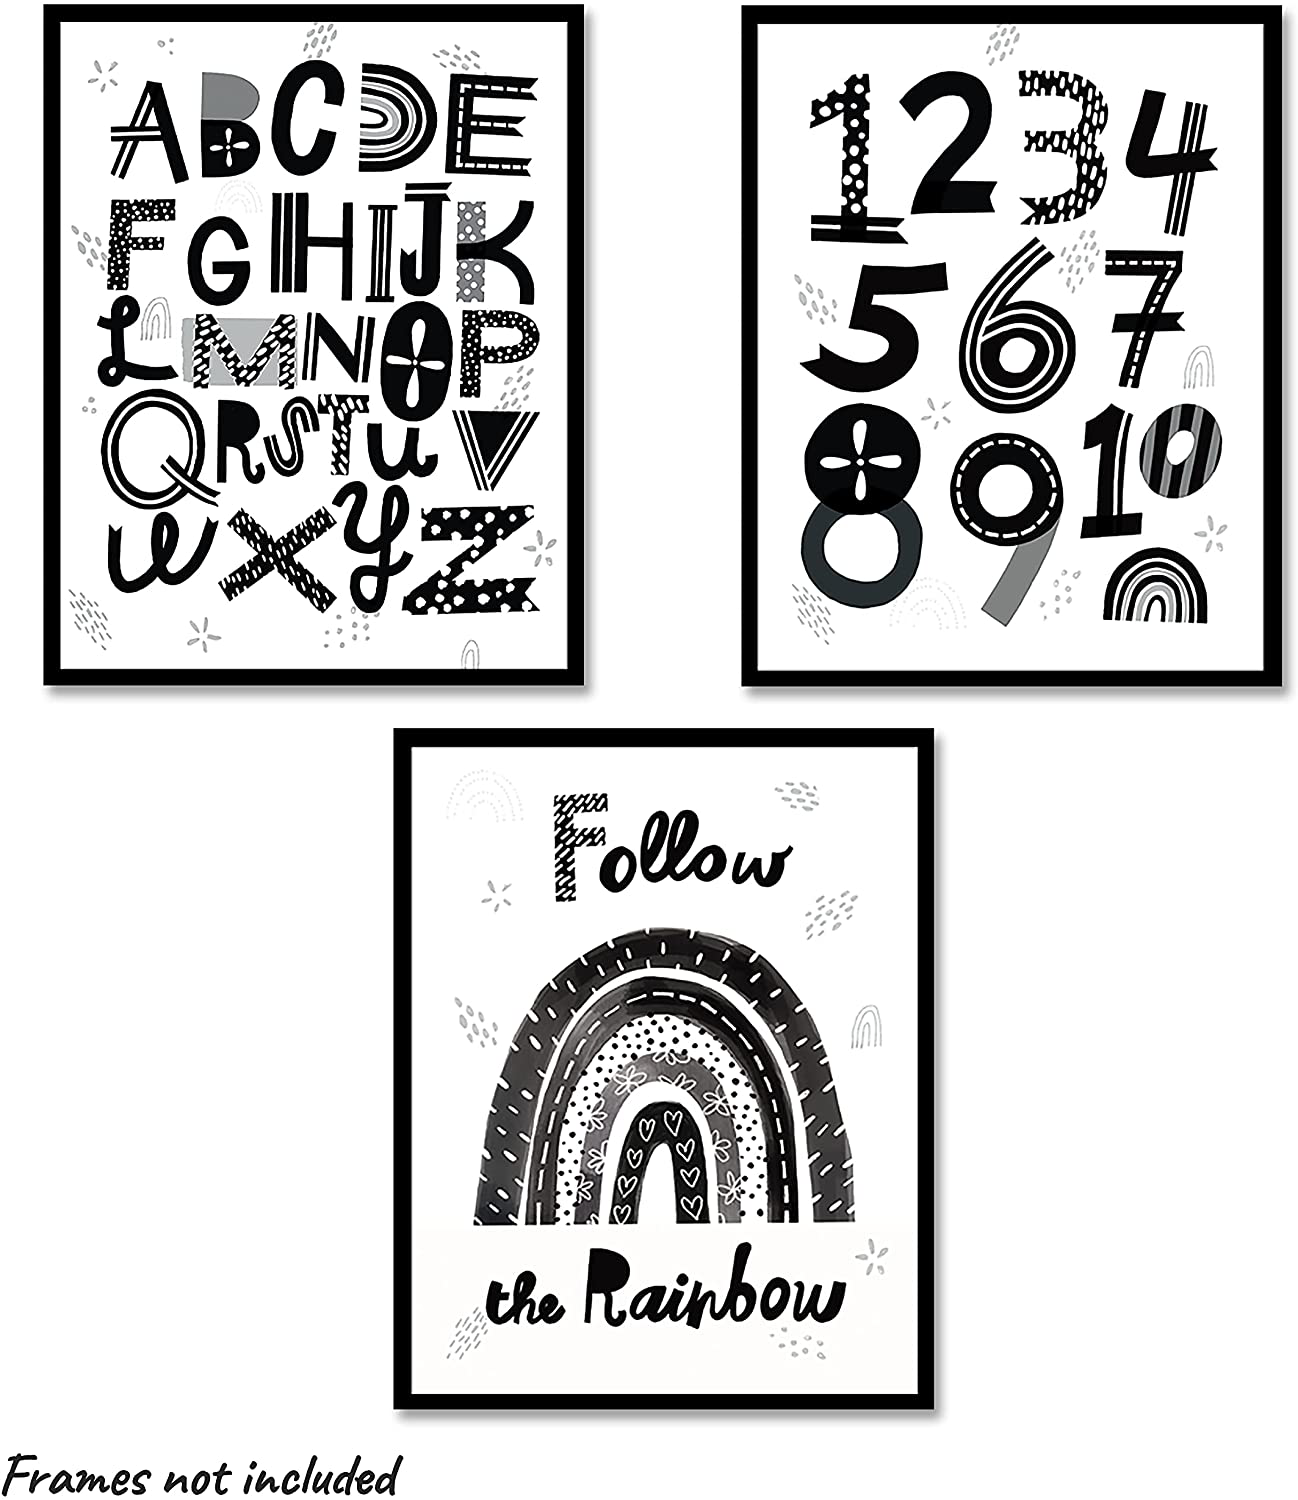 Nursery Wall Decor 3 Double-Sided Kids Posters | Alphabet Poster, 123 & Rainbow Decor | Kids Room & Playroom Decor Wall Art, Baby Girl/Boy Room Decor | ABC Poster for Toddlers Wall